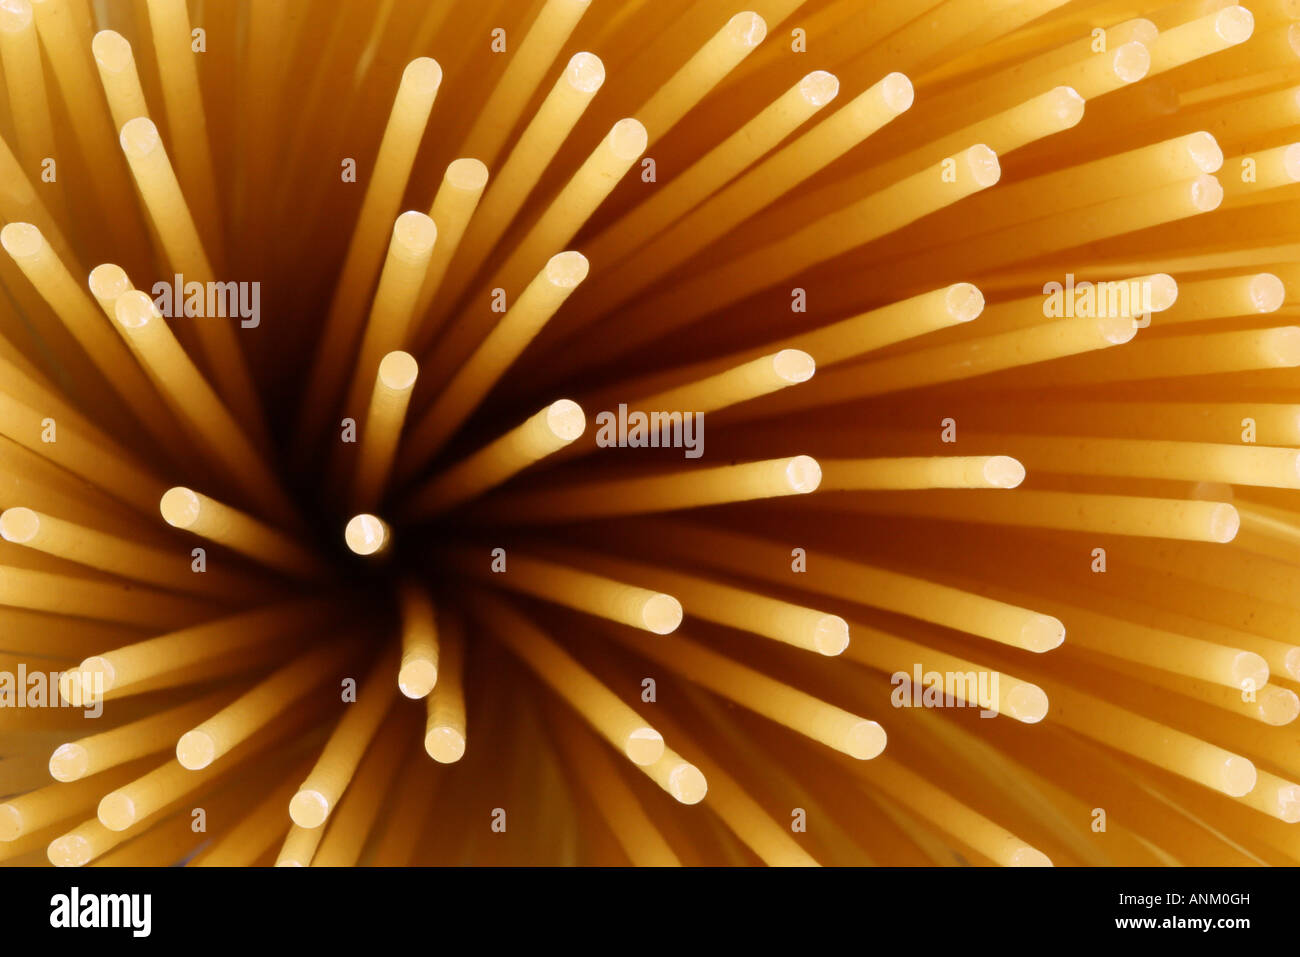 abstract of spagetti Stock Photo